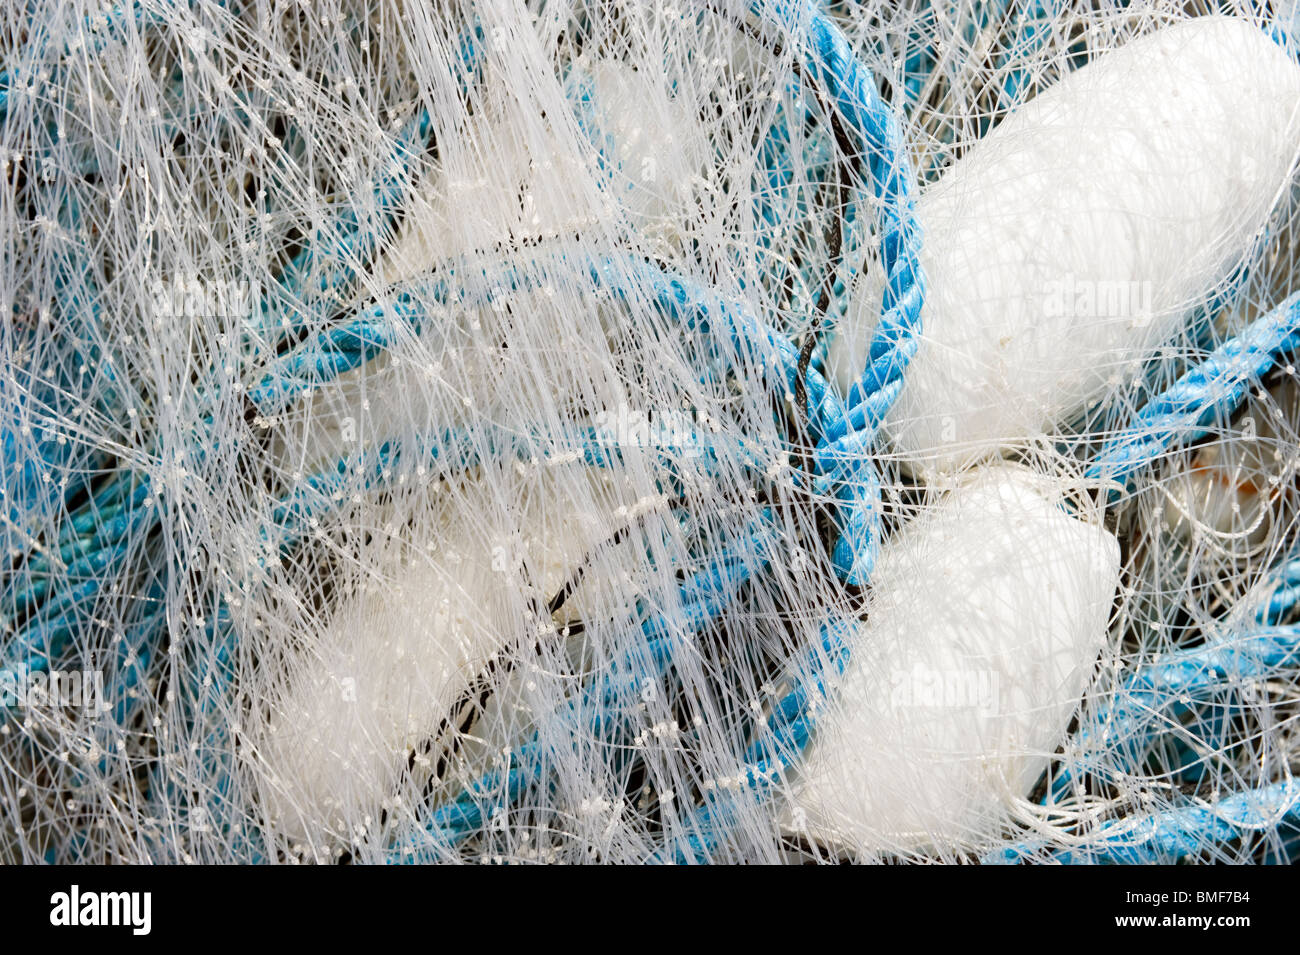 A pile of ropes nylon monofilament fishing nets and marker buoys